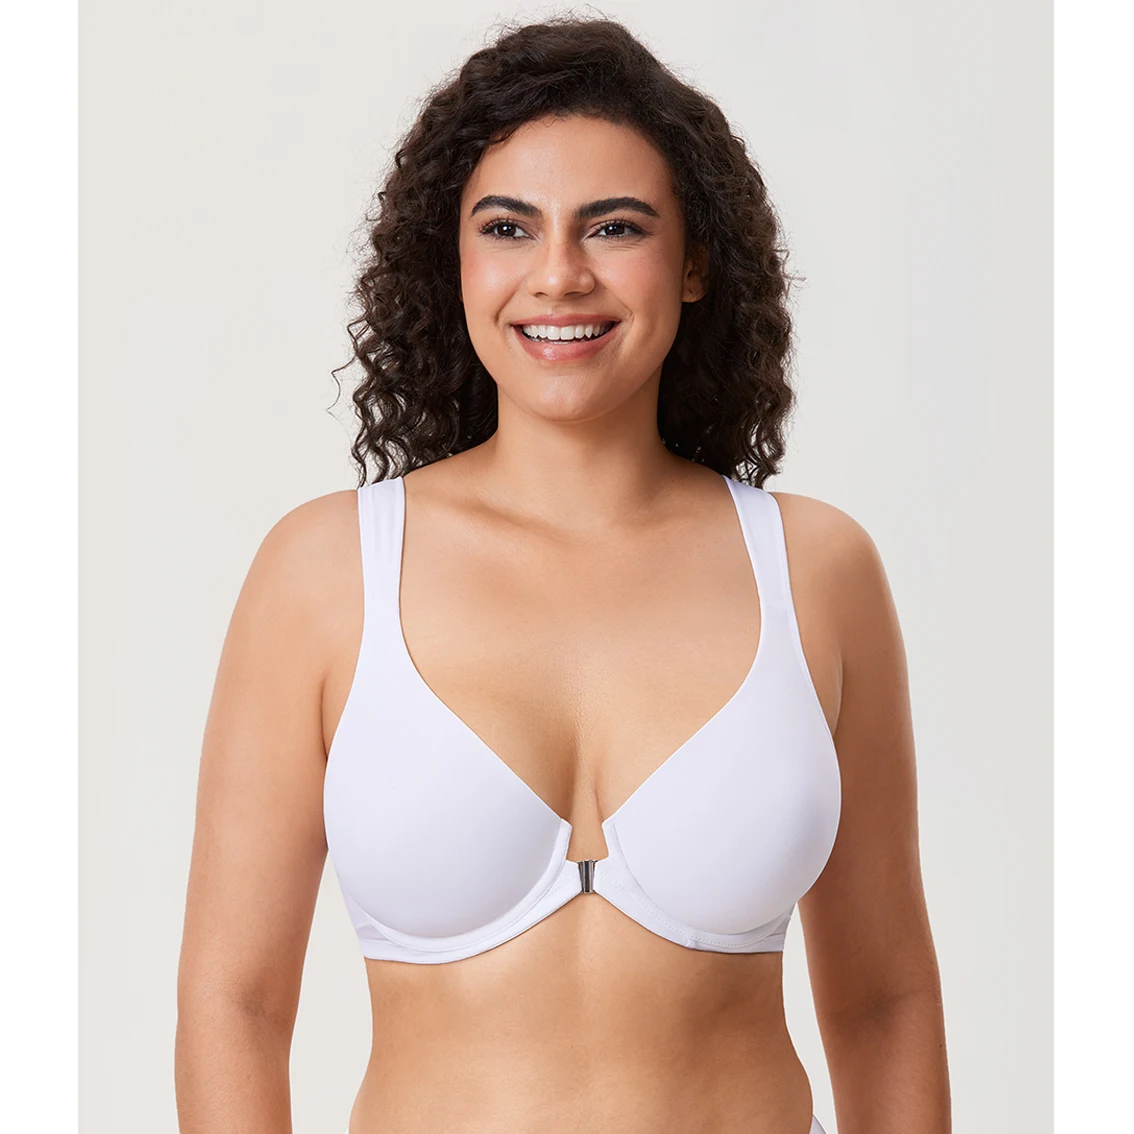 https://ae01.alicdn.com/kf/S017915e4c821415ca0fb1436a8c1e2e2y/Women-s-Plus-Size-Full-Coverage-Bra-Posture-Underwire-Front-Closure-Lingerie-Support-Unlined-Plunge-Racerback.jpg